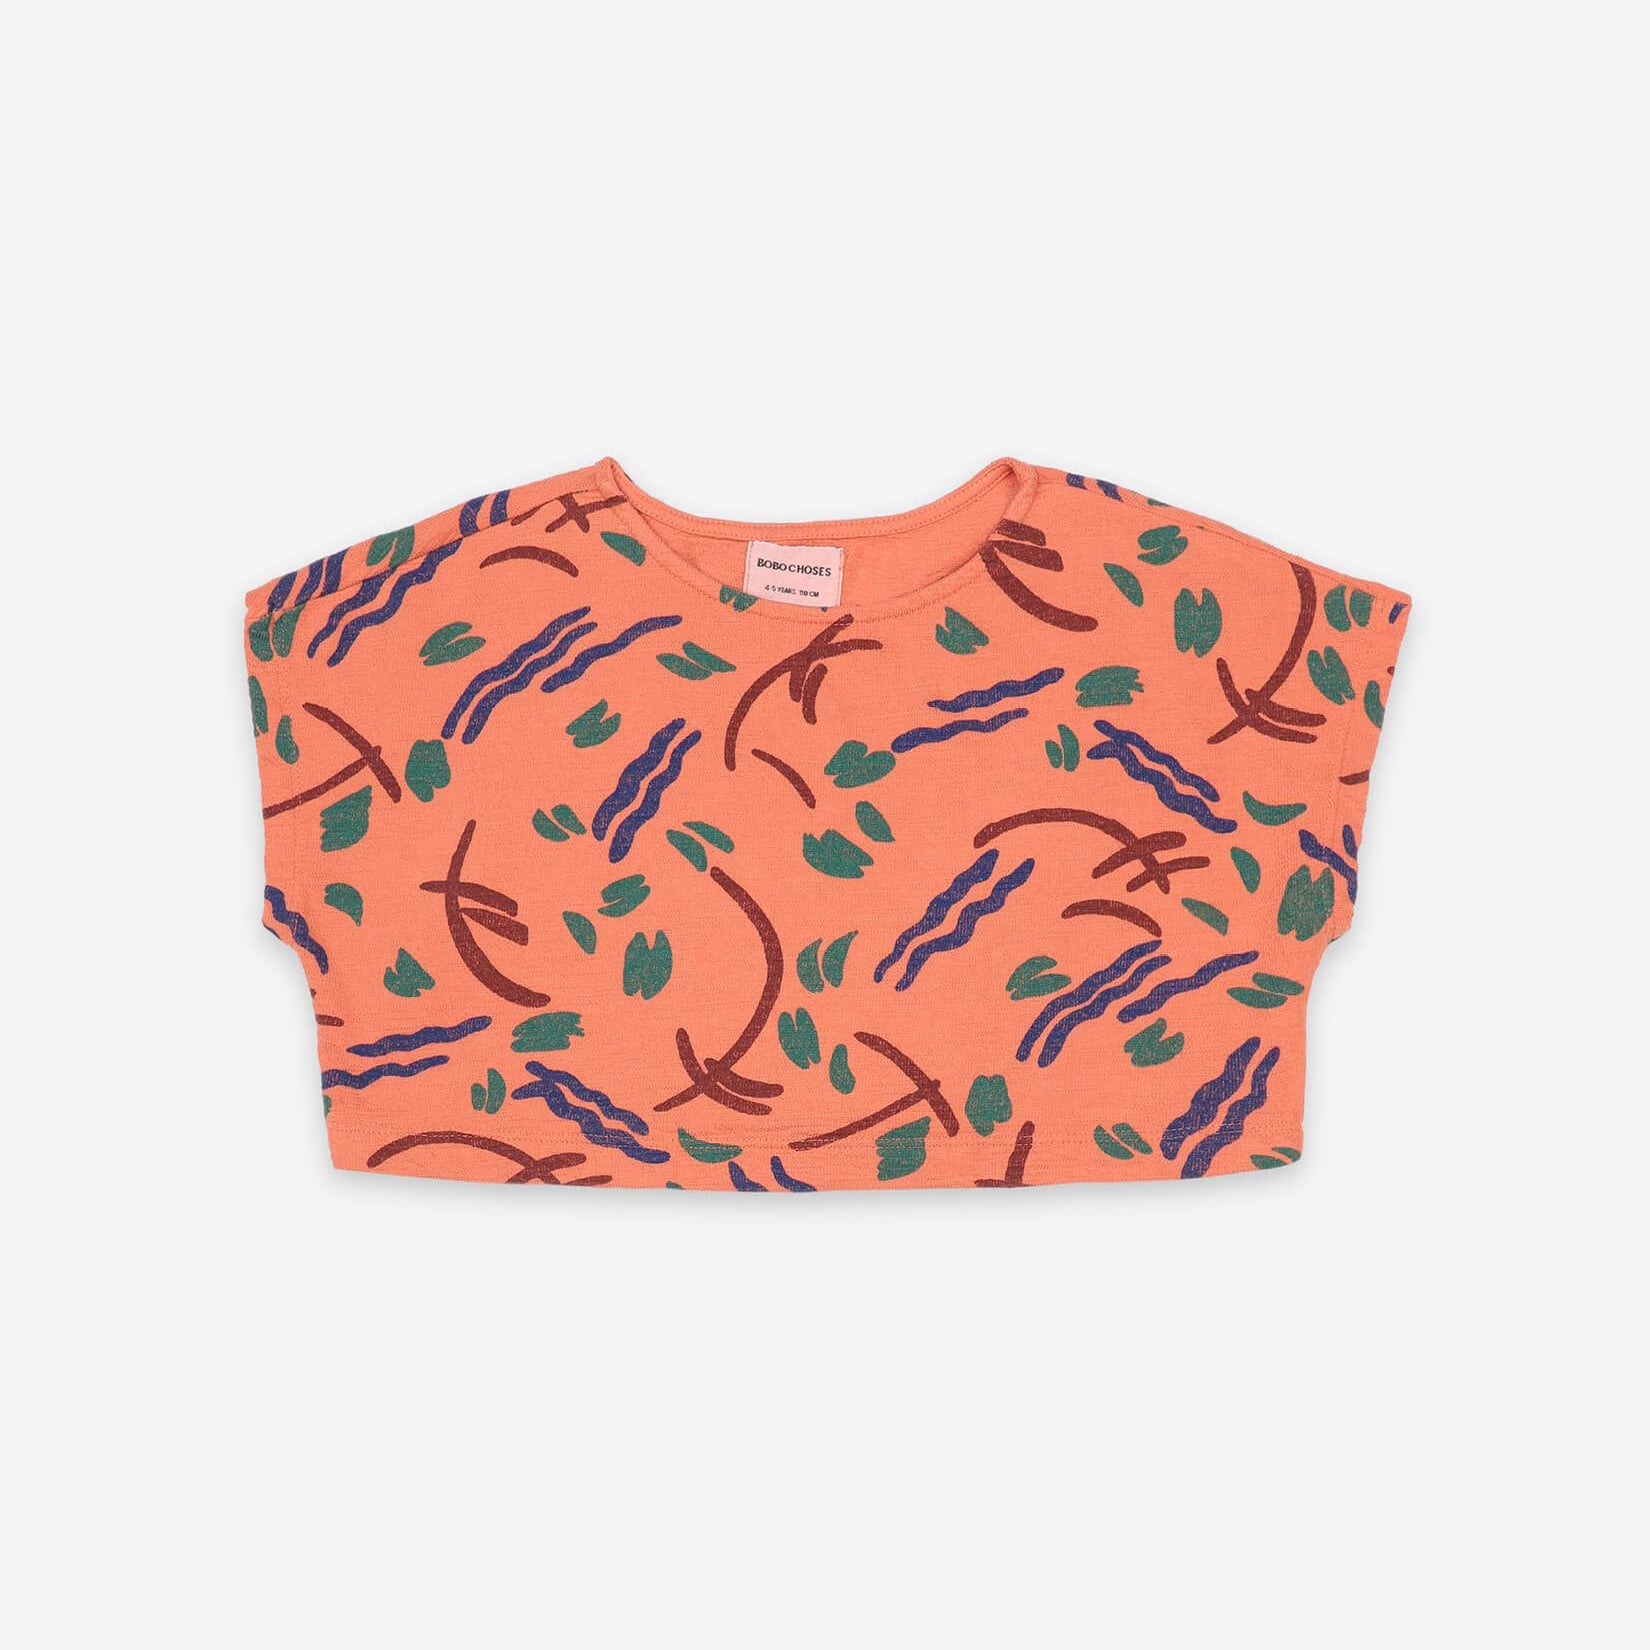 Strokes All Over Cropped Sweatshirt